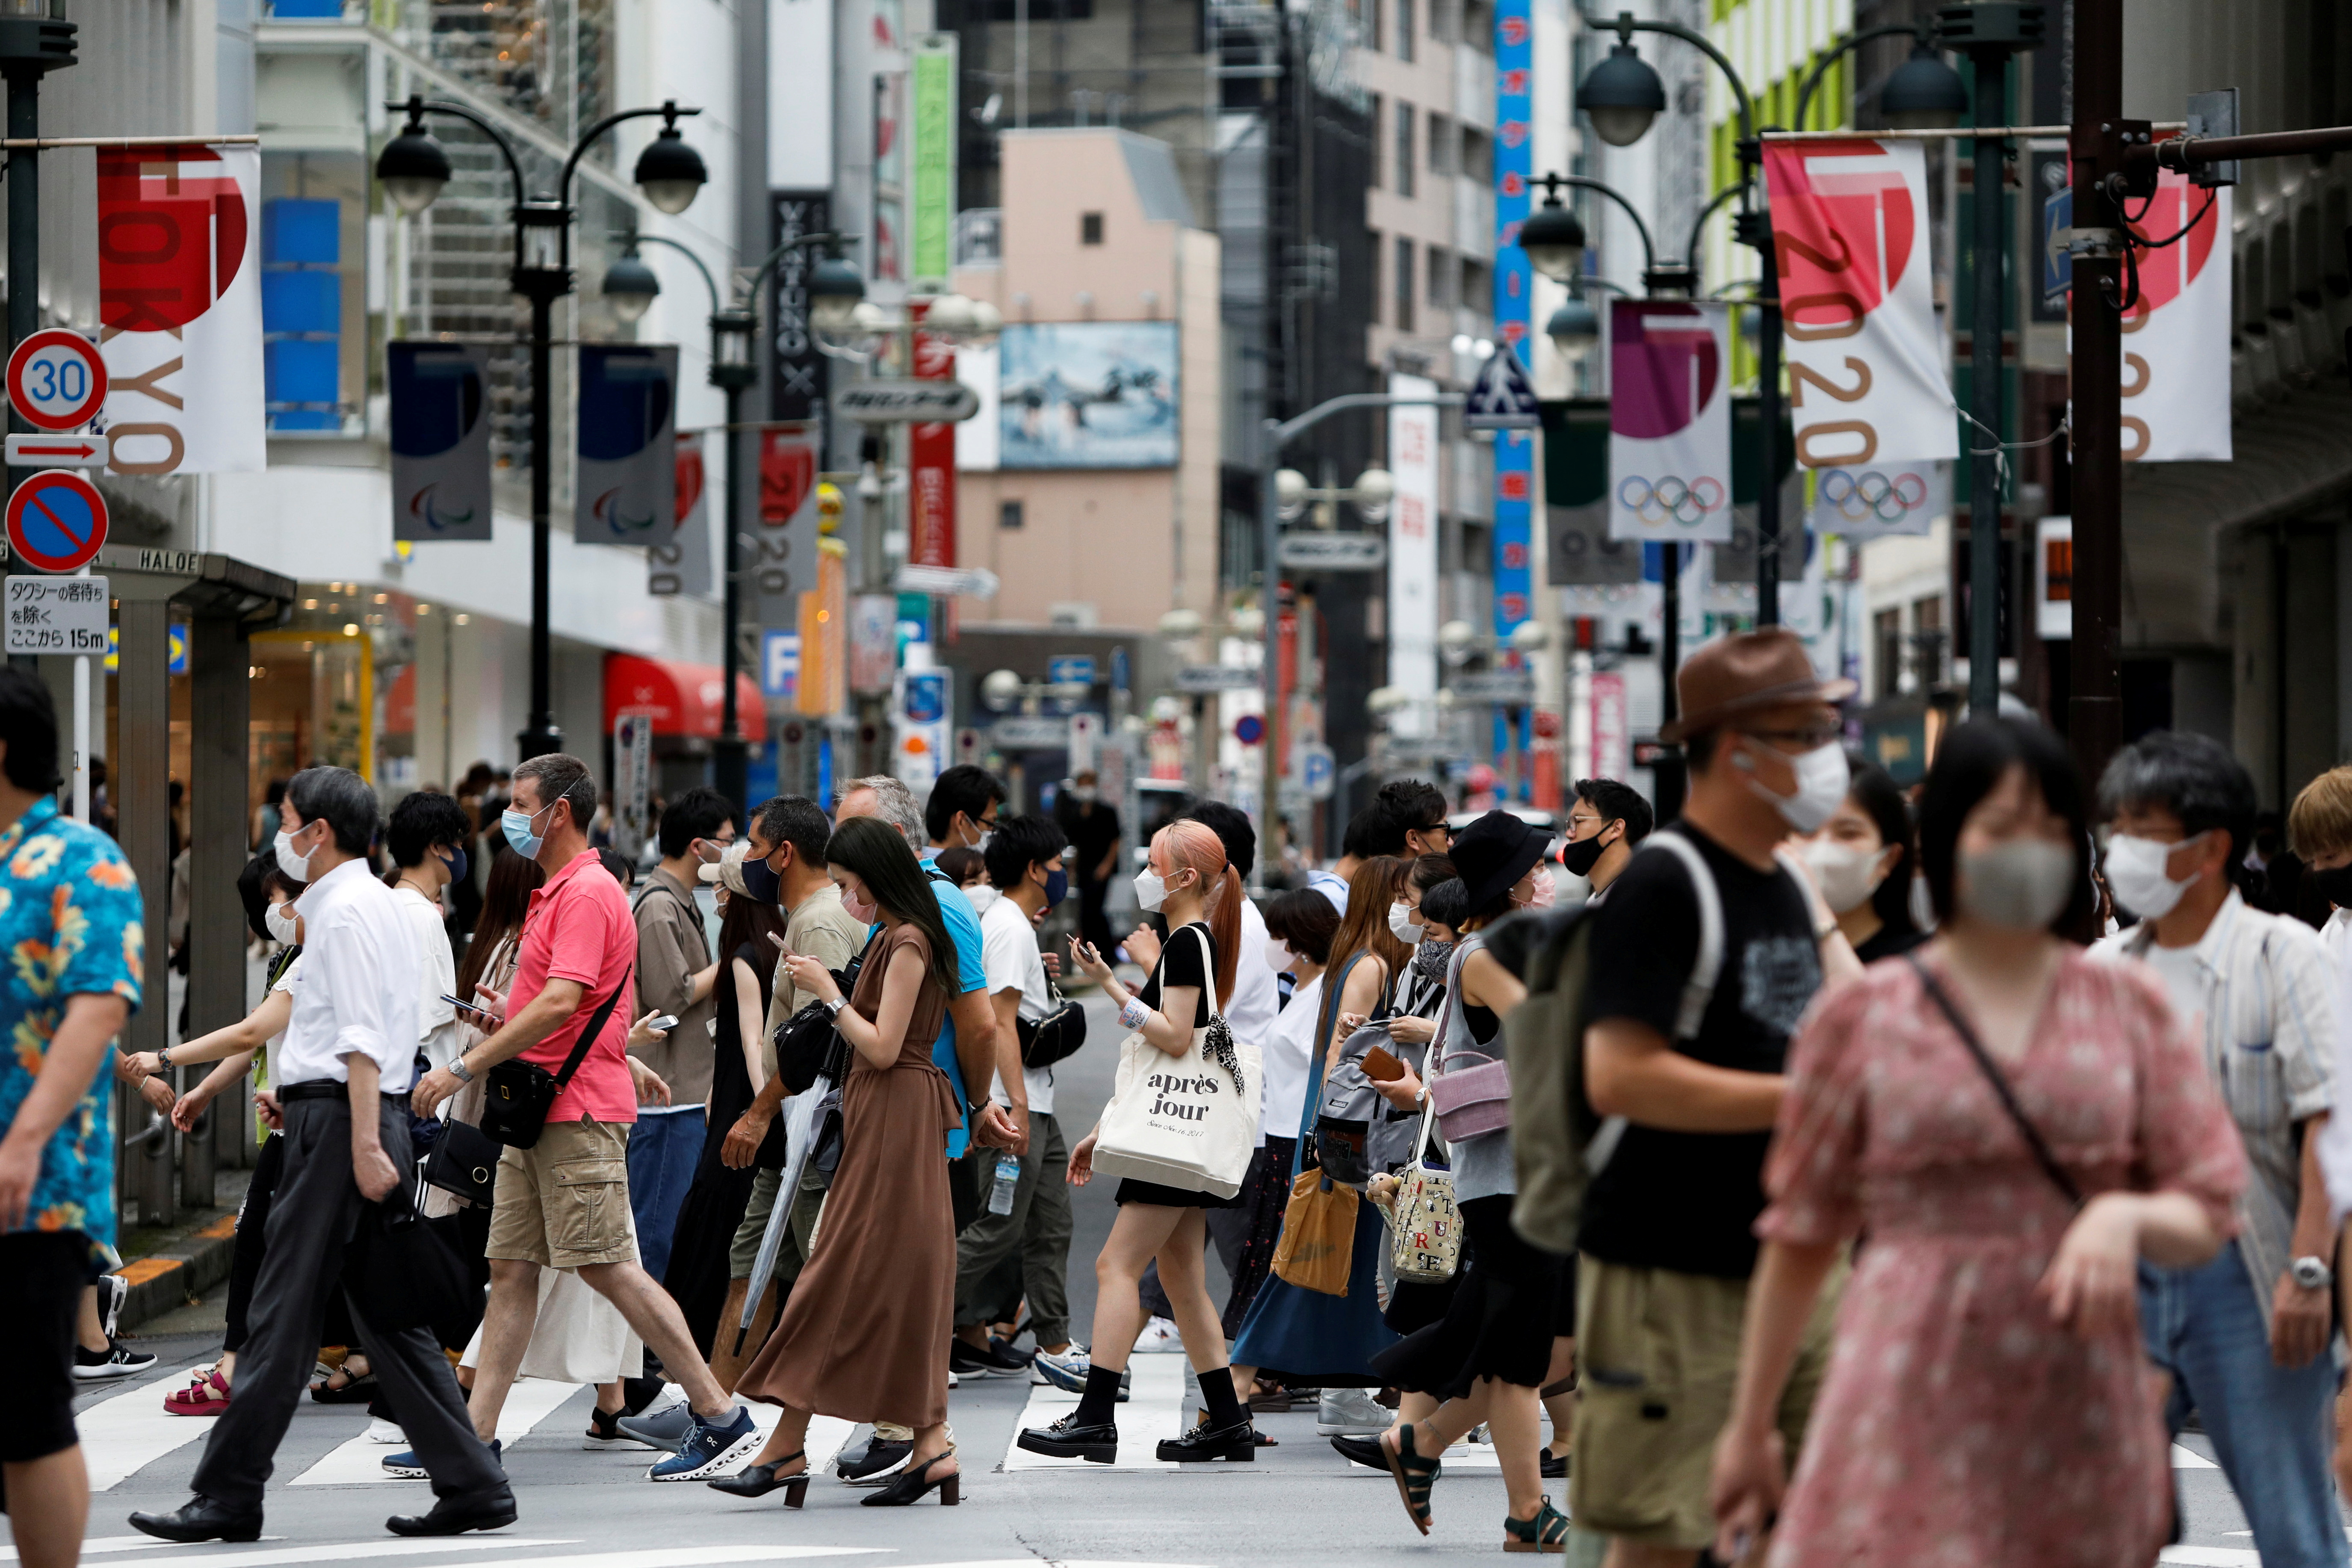 People walk at a crossing in Shibuya shopping area, amid the coronavirus disease (COVID-19) pandemic, in Tokyo, Japan August 7, 2021. REUTERS/Androniki Christodoulou